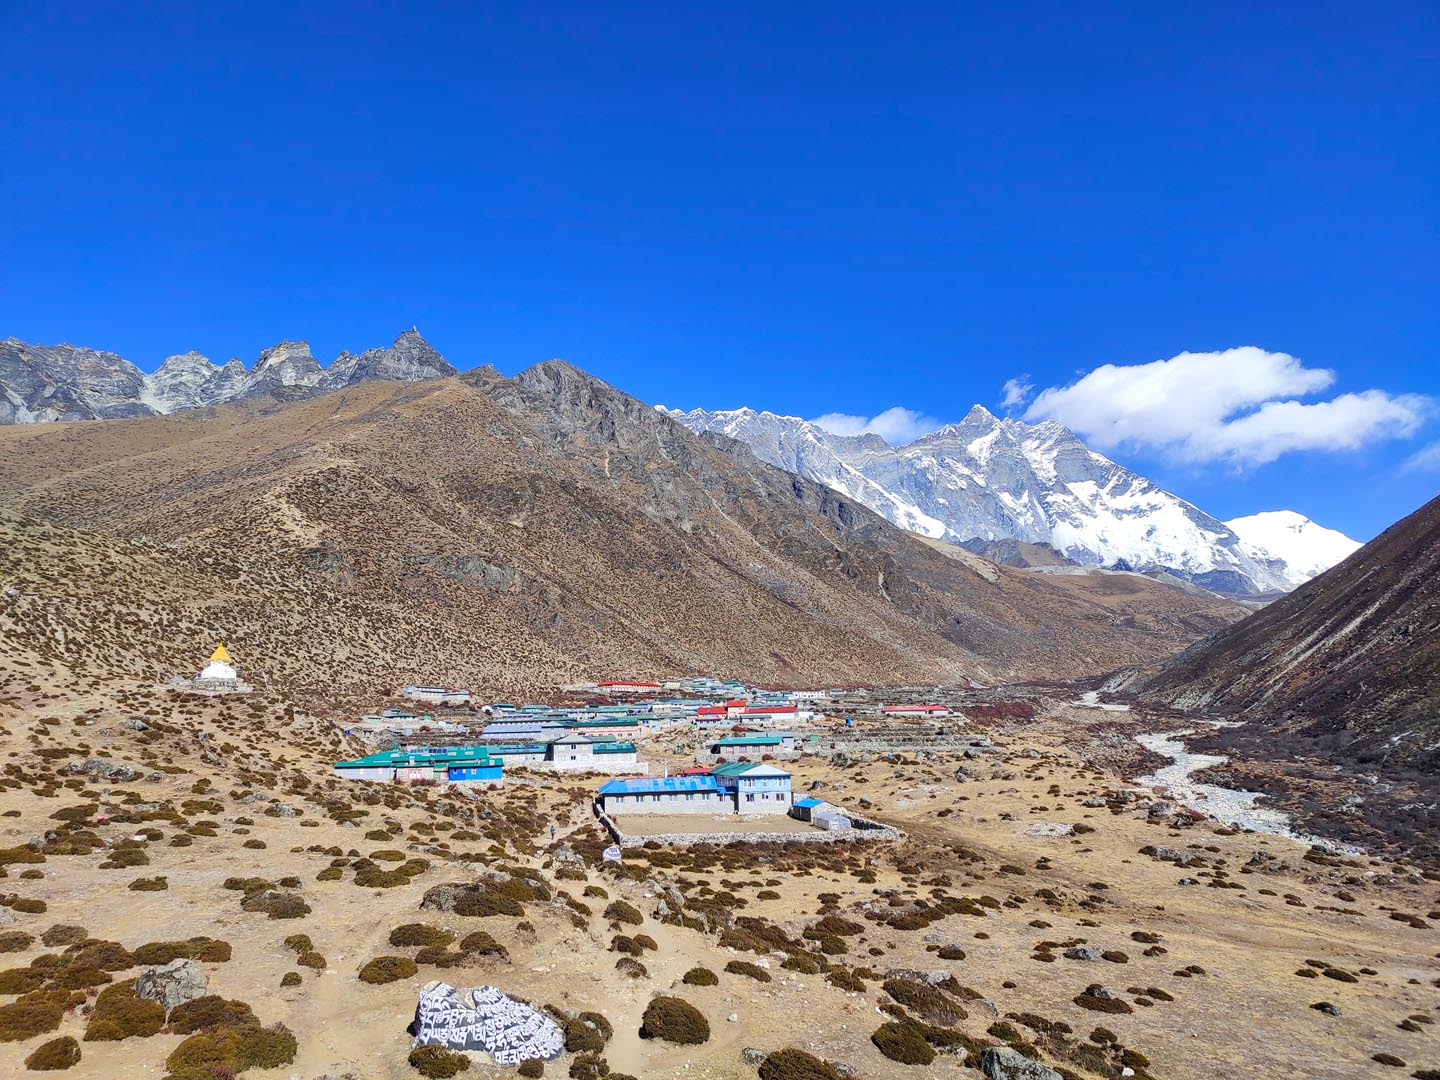 Dingboche village at an altitude of 4350m